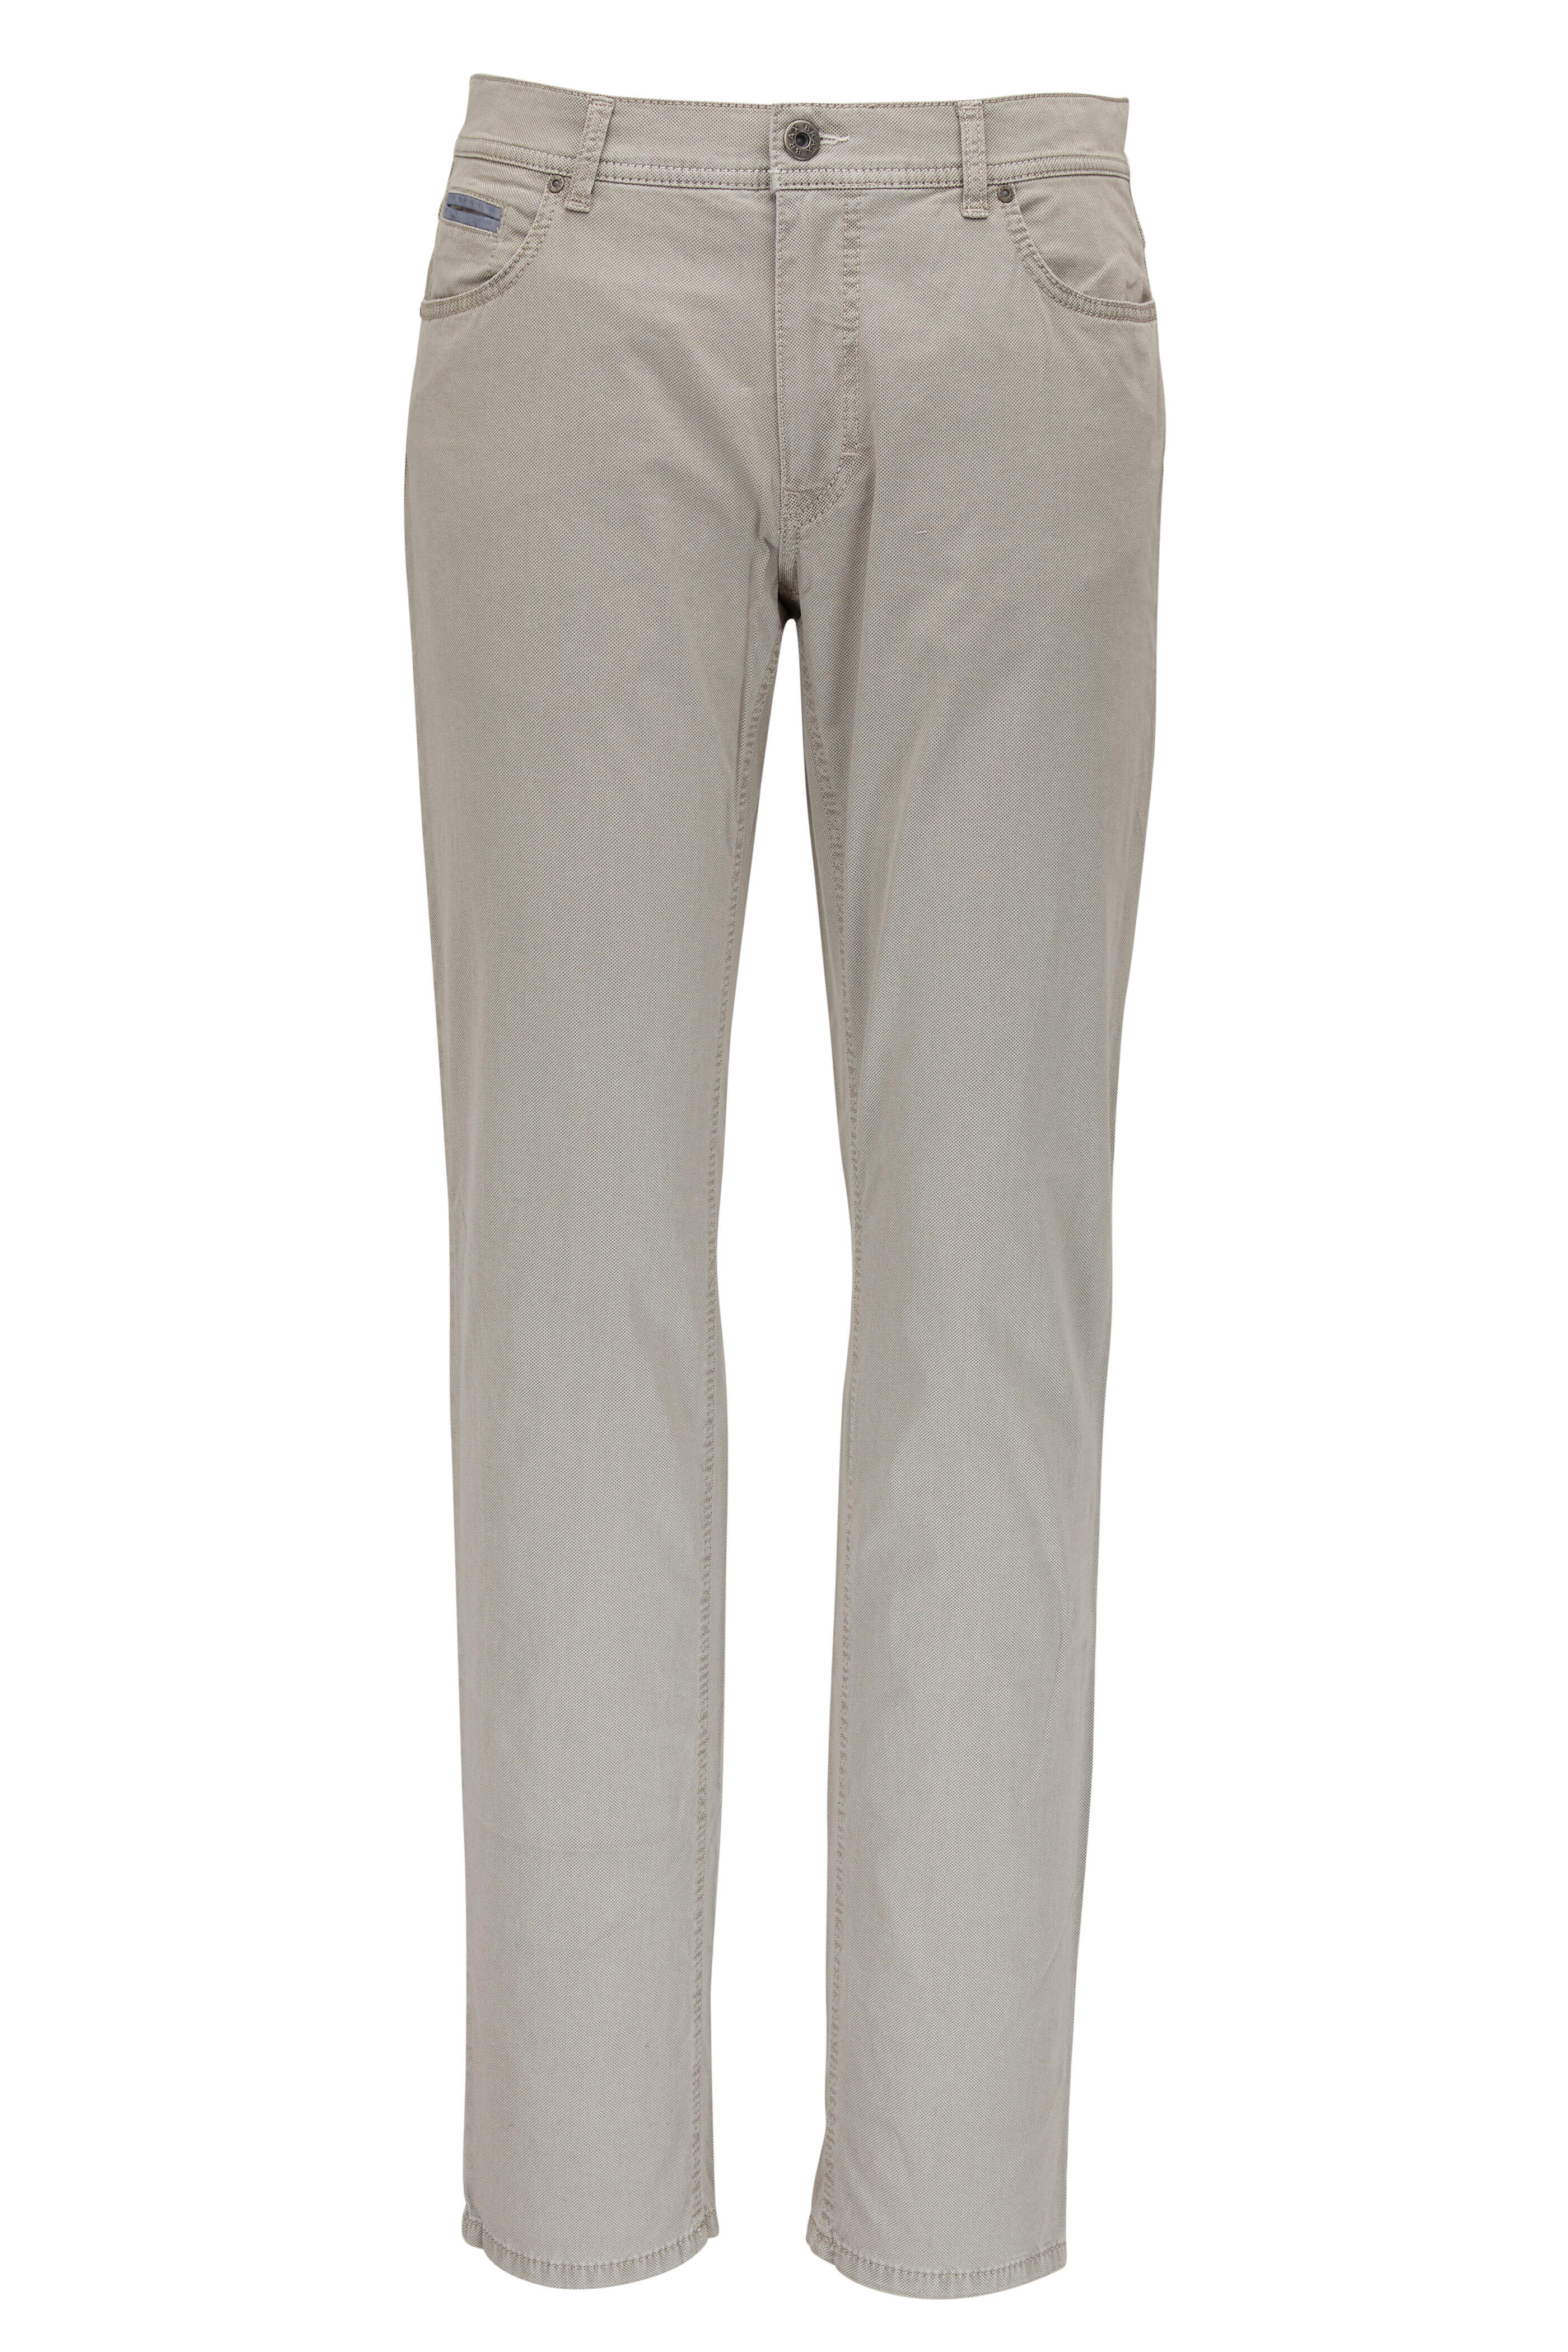 Effectiviteit salade Componist Brax - Cooper Taupe Stretch Cotton Five Pocket Pant